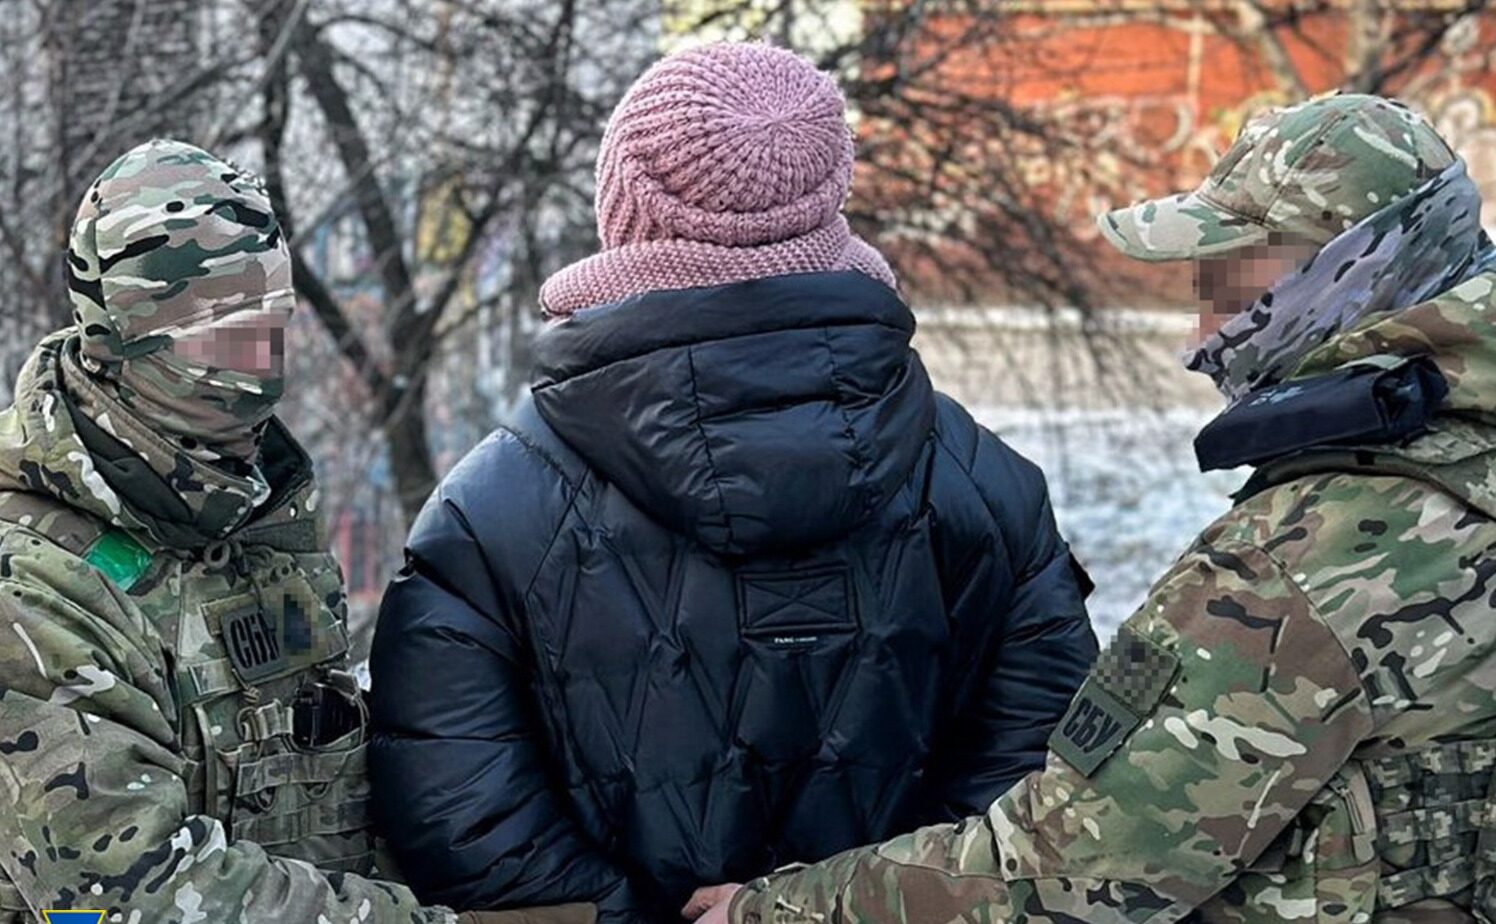 The Security Service of Ukraine has detained 5 Russian agents who were spying for the FSB in three regions of Ukraine